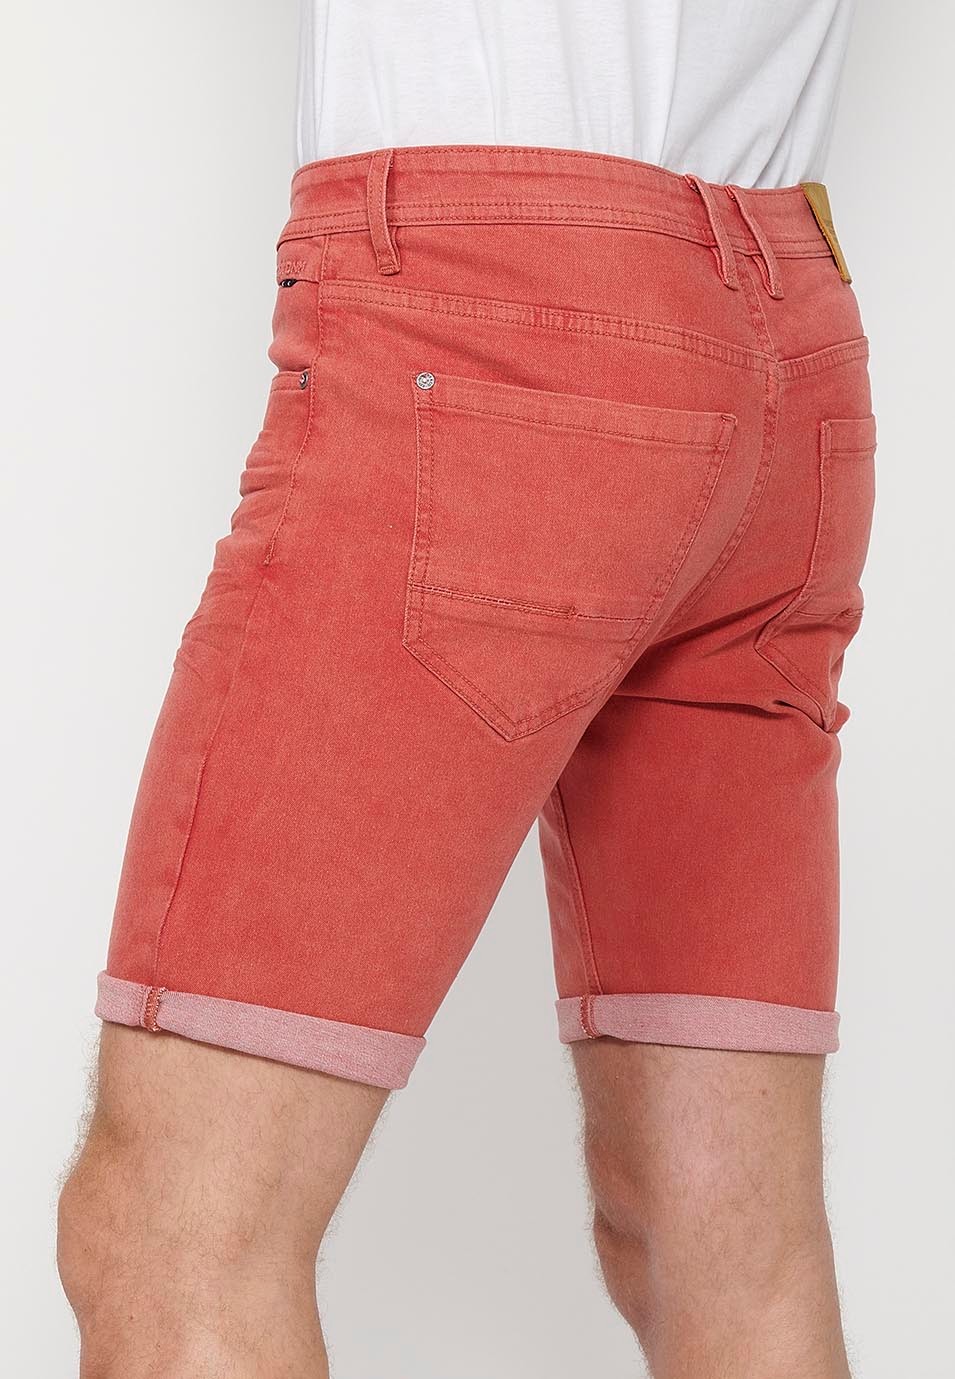 Shorts with a turn-up finish with front zipper and button closure and five pockets, one with a match pocket, in Red for Men 9